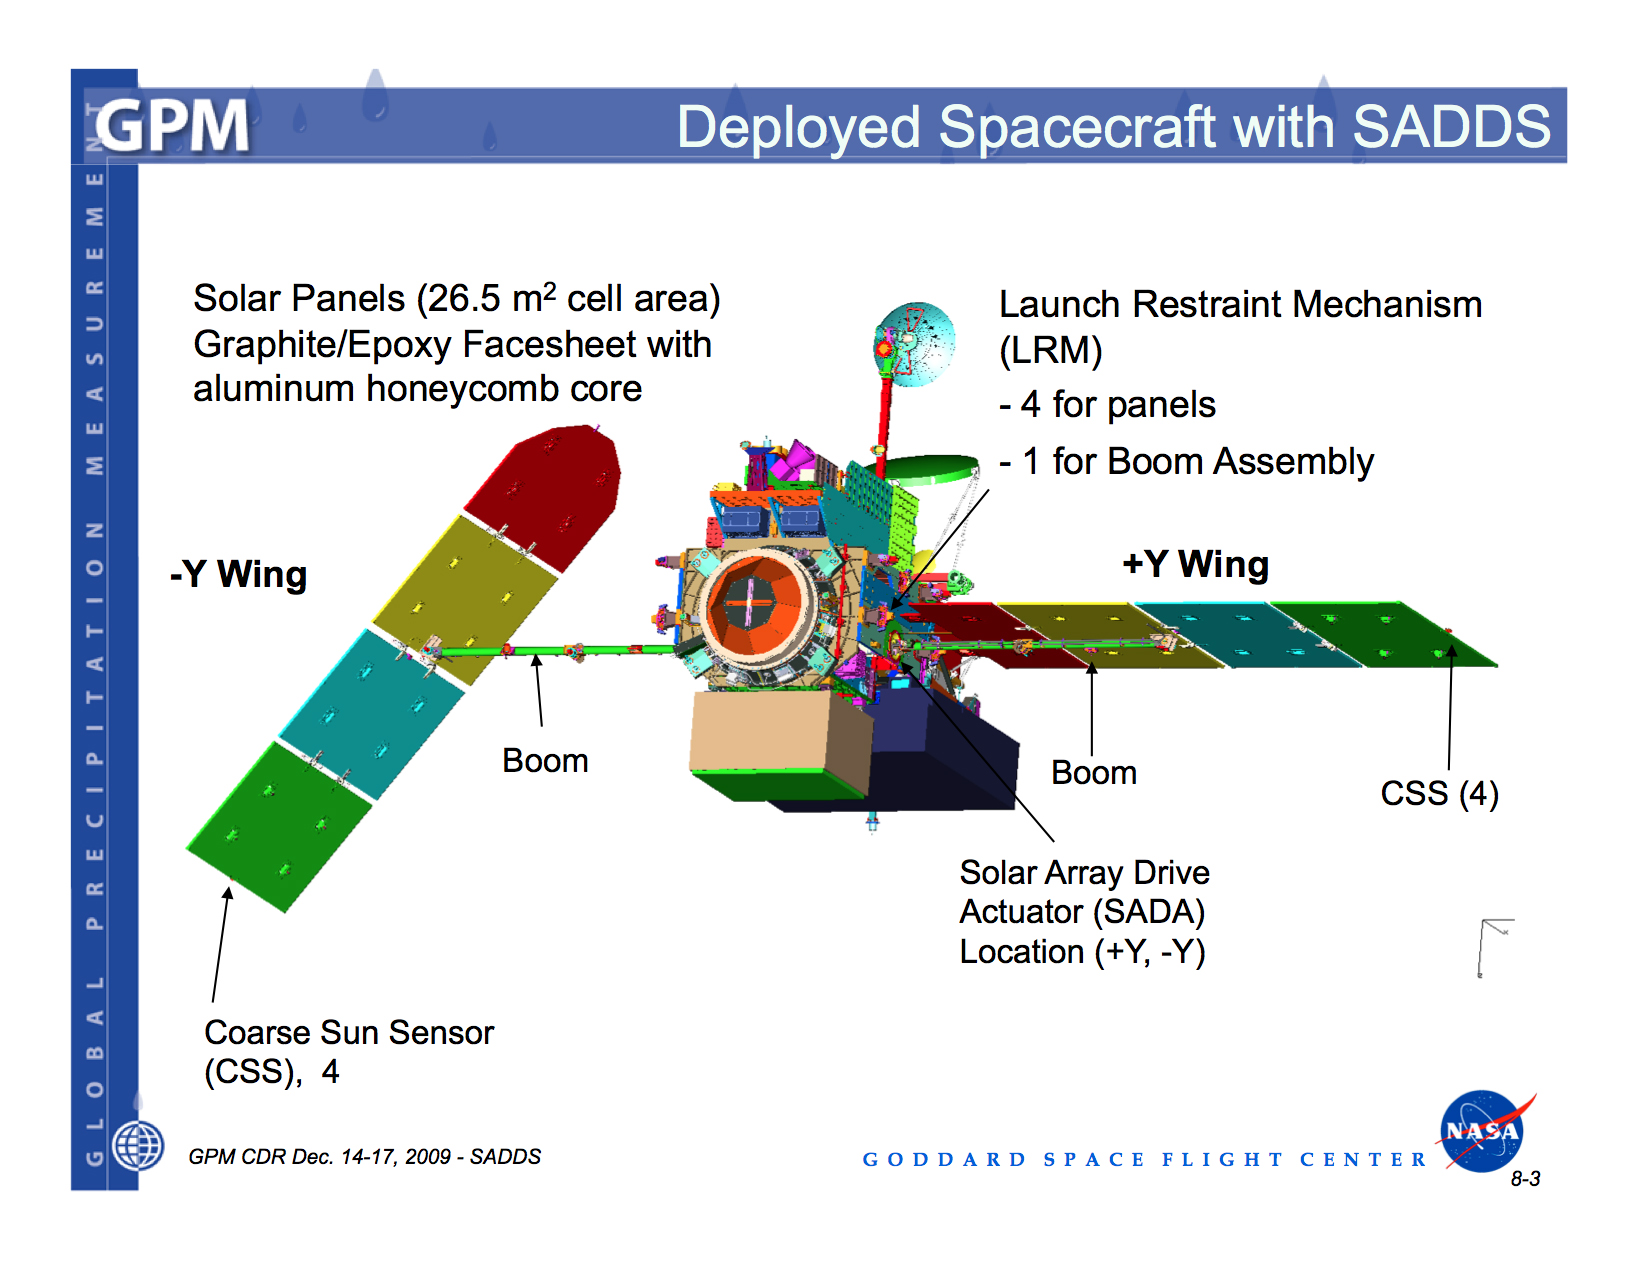 CG view of the satellite showing -Y and +Y Wings, Coarse Sun Sensors, etc..